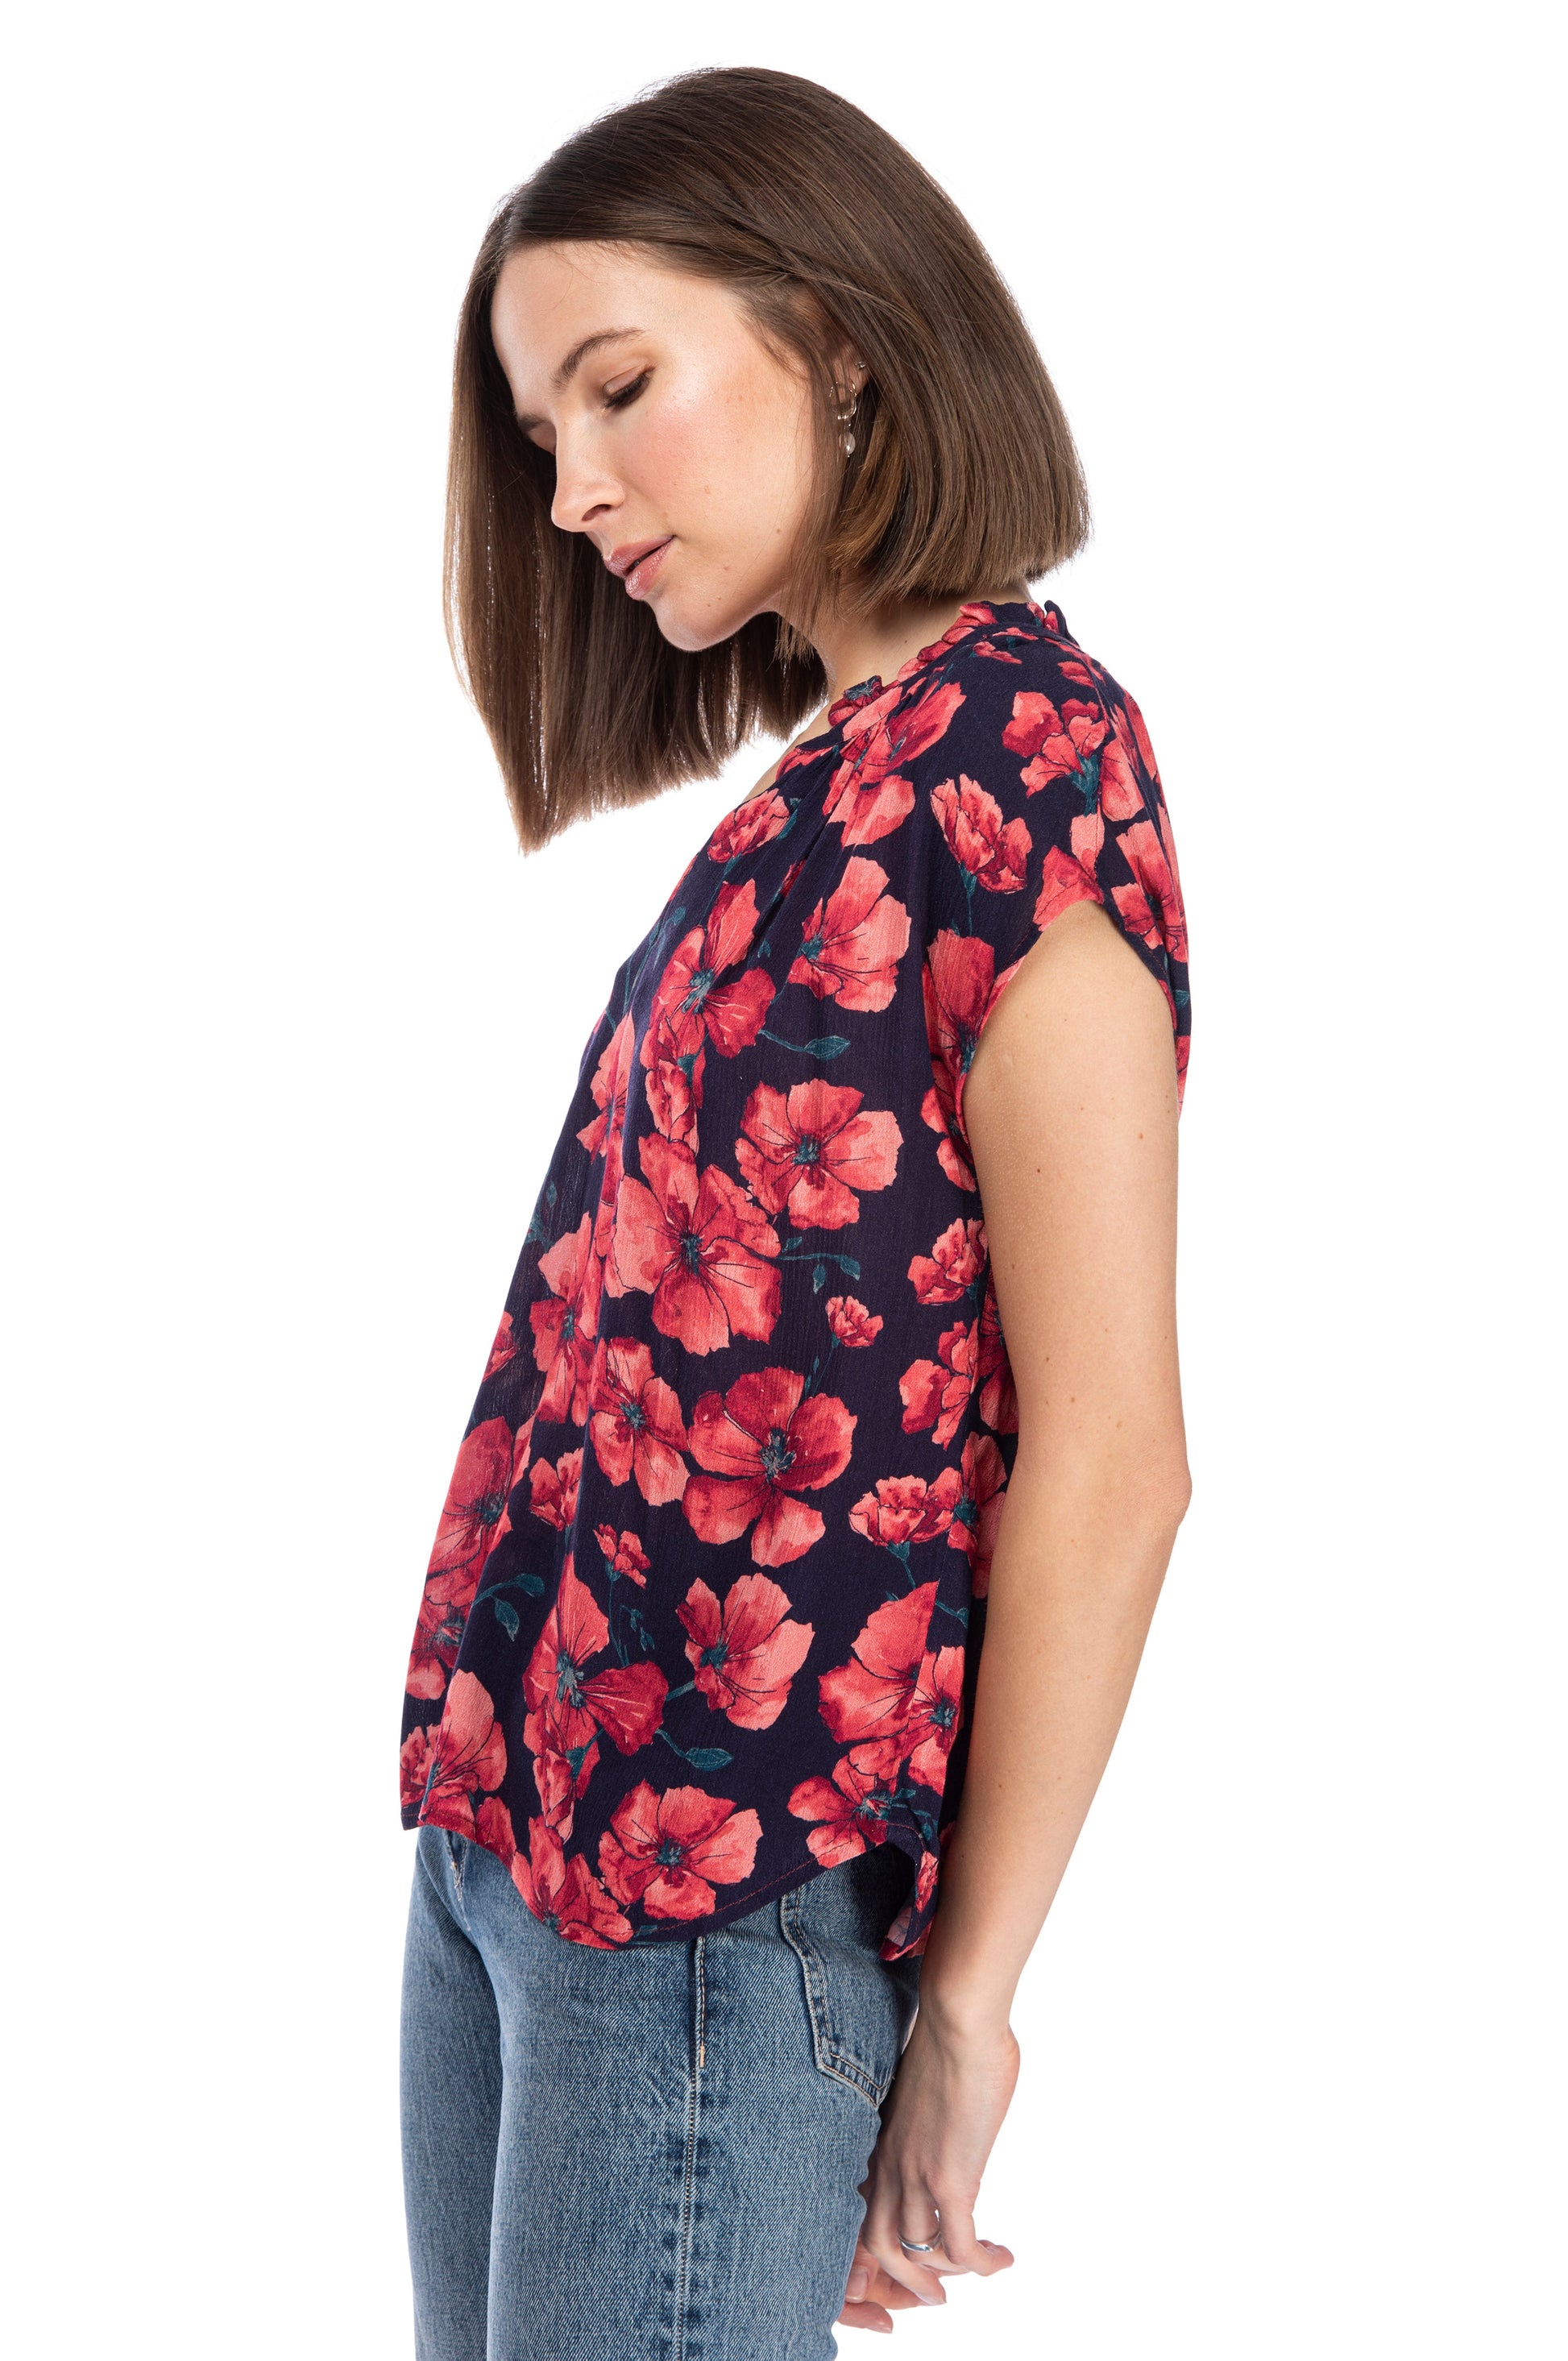 A woman in a Ruffle Neck Top from B Collection by Bobeau and jeans in a side profile pose against a white background.